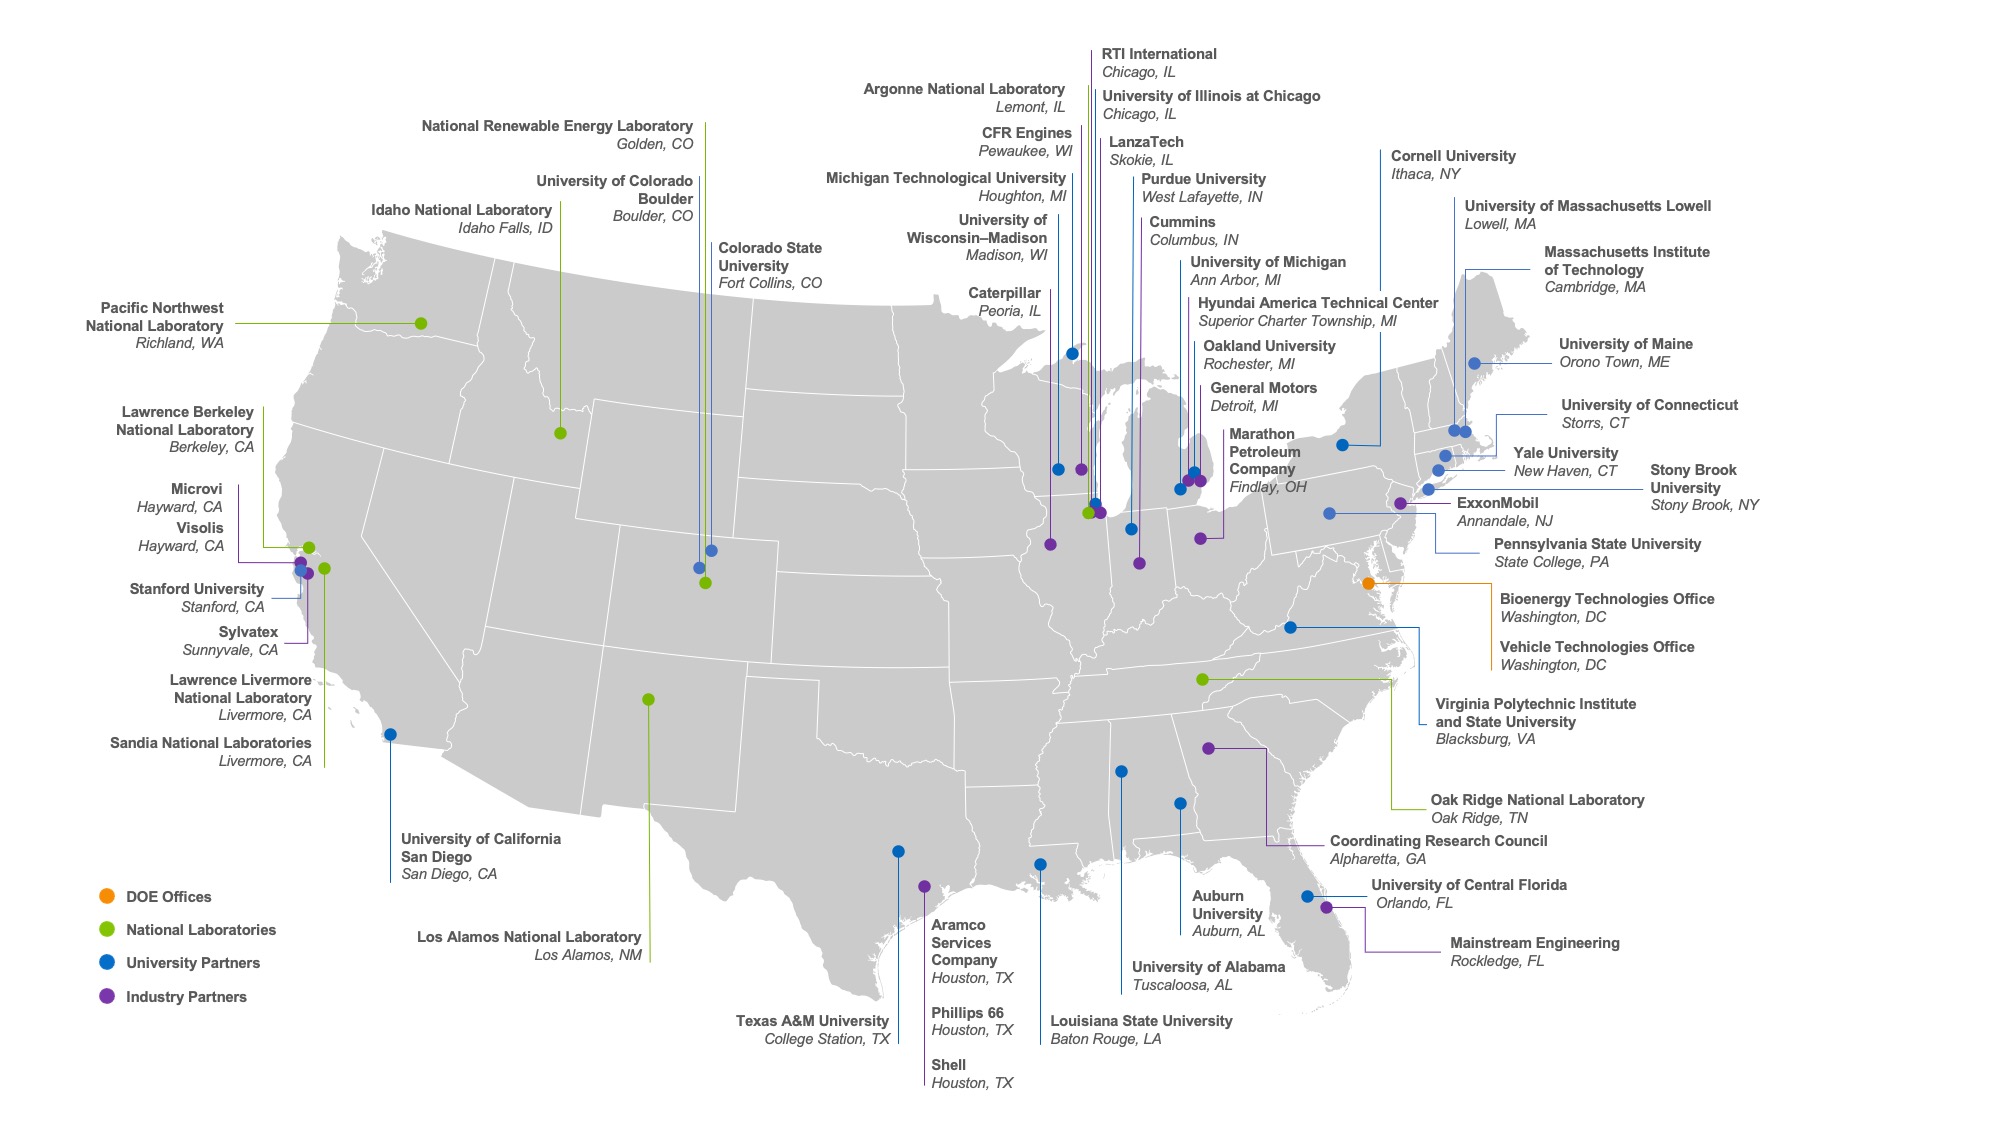 Map of the U.S. showing partners from national labs, universities, and industry